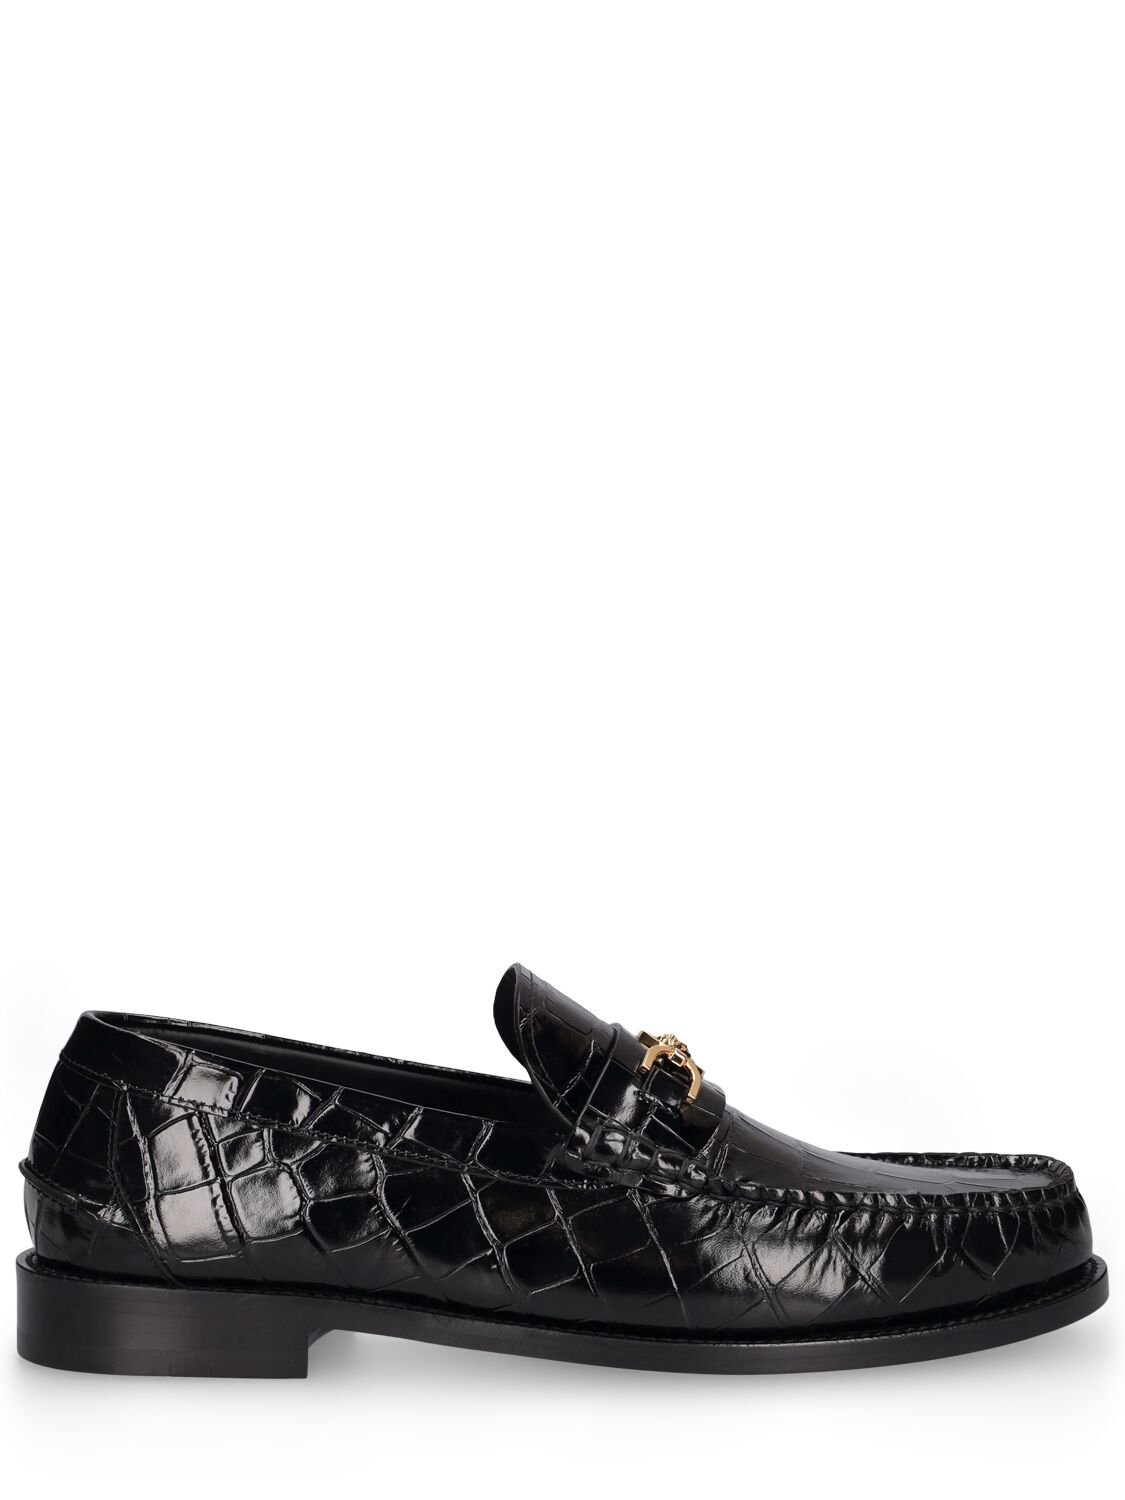 Versace Medusa Croc Embossed Leather Loafers In Black+gold